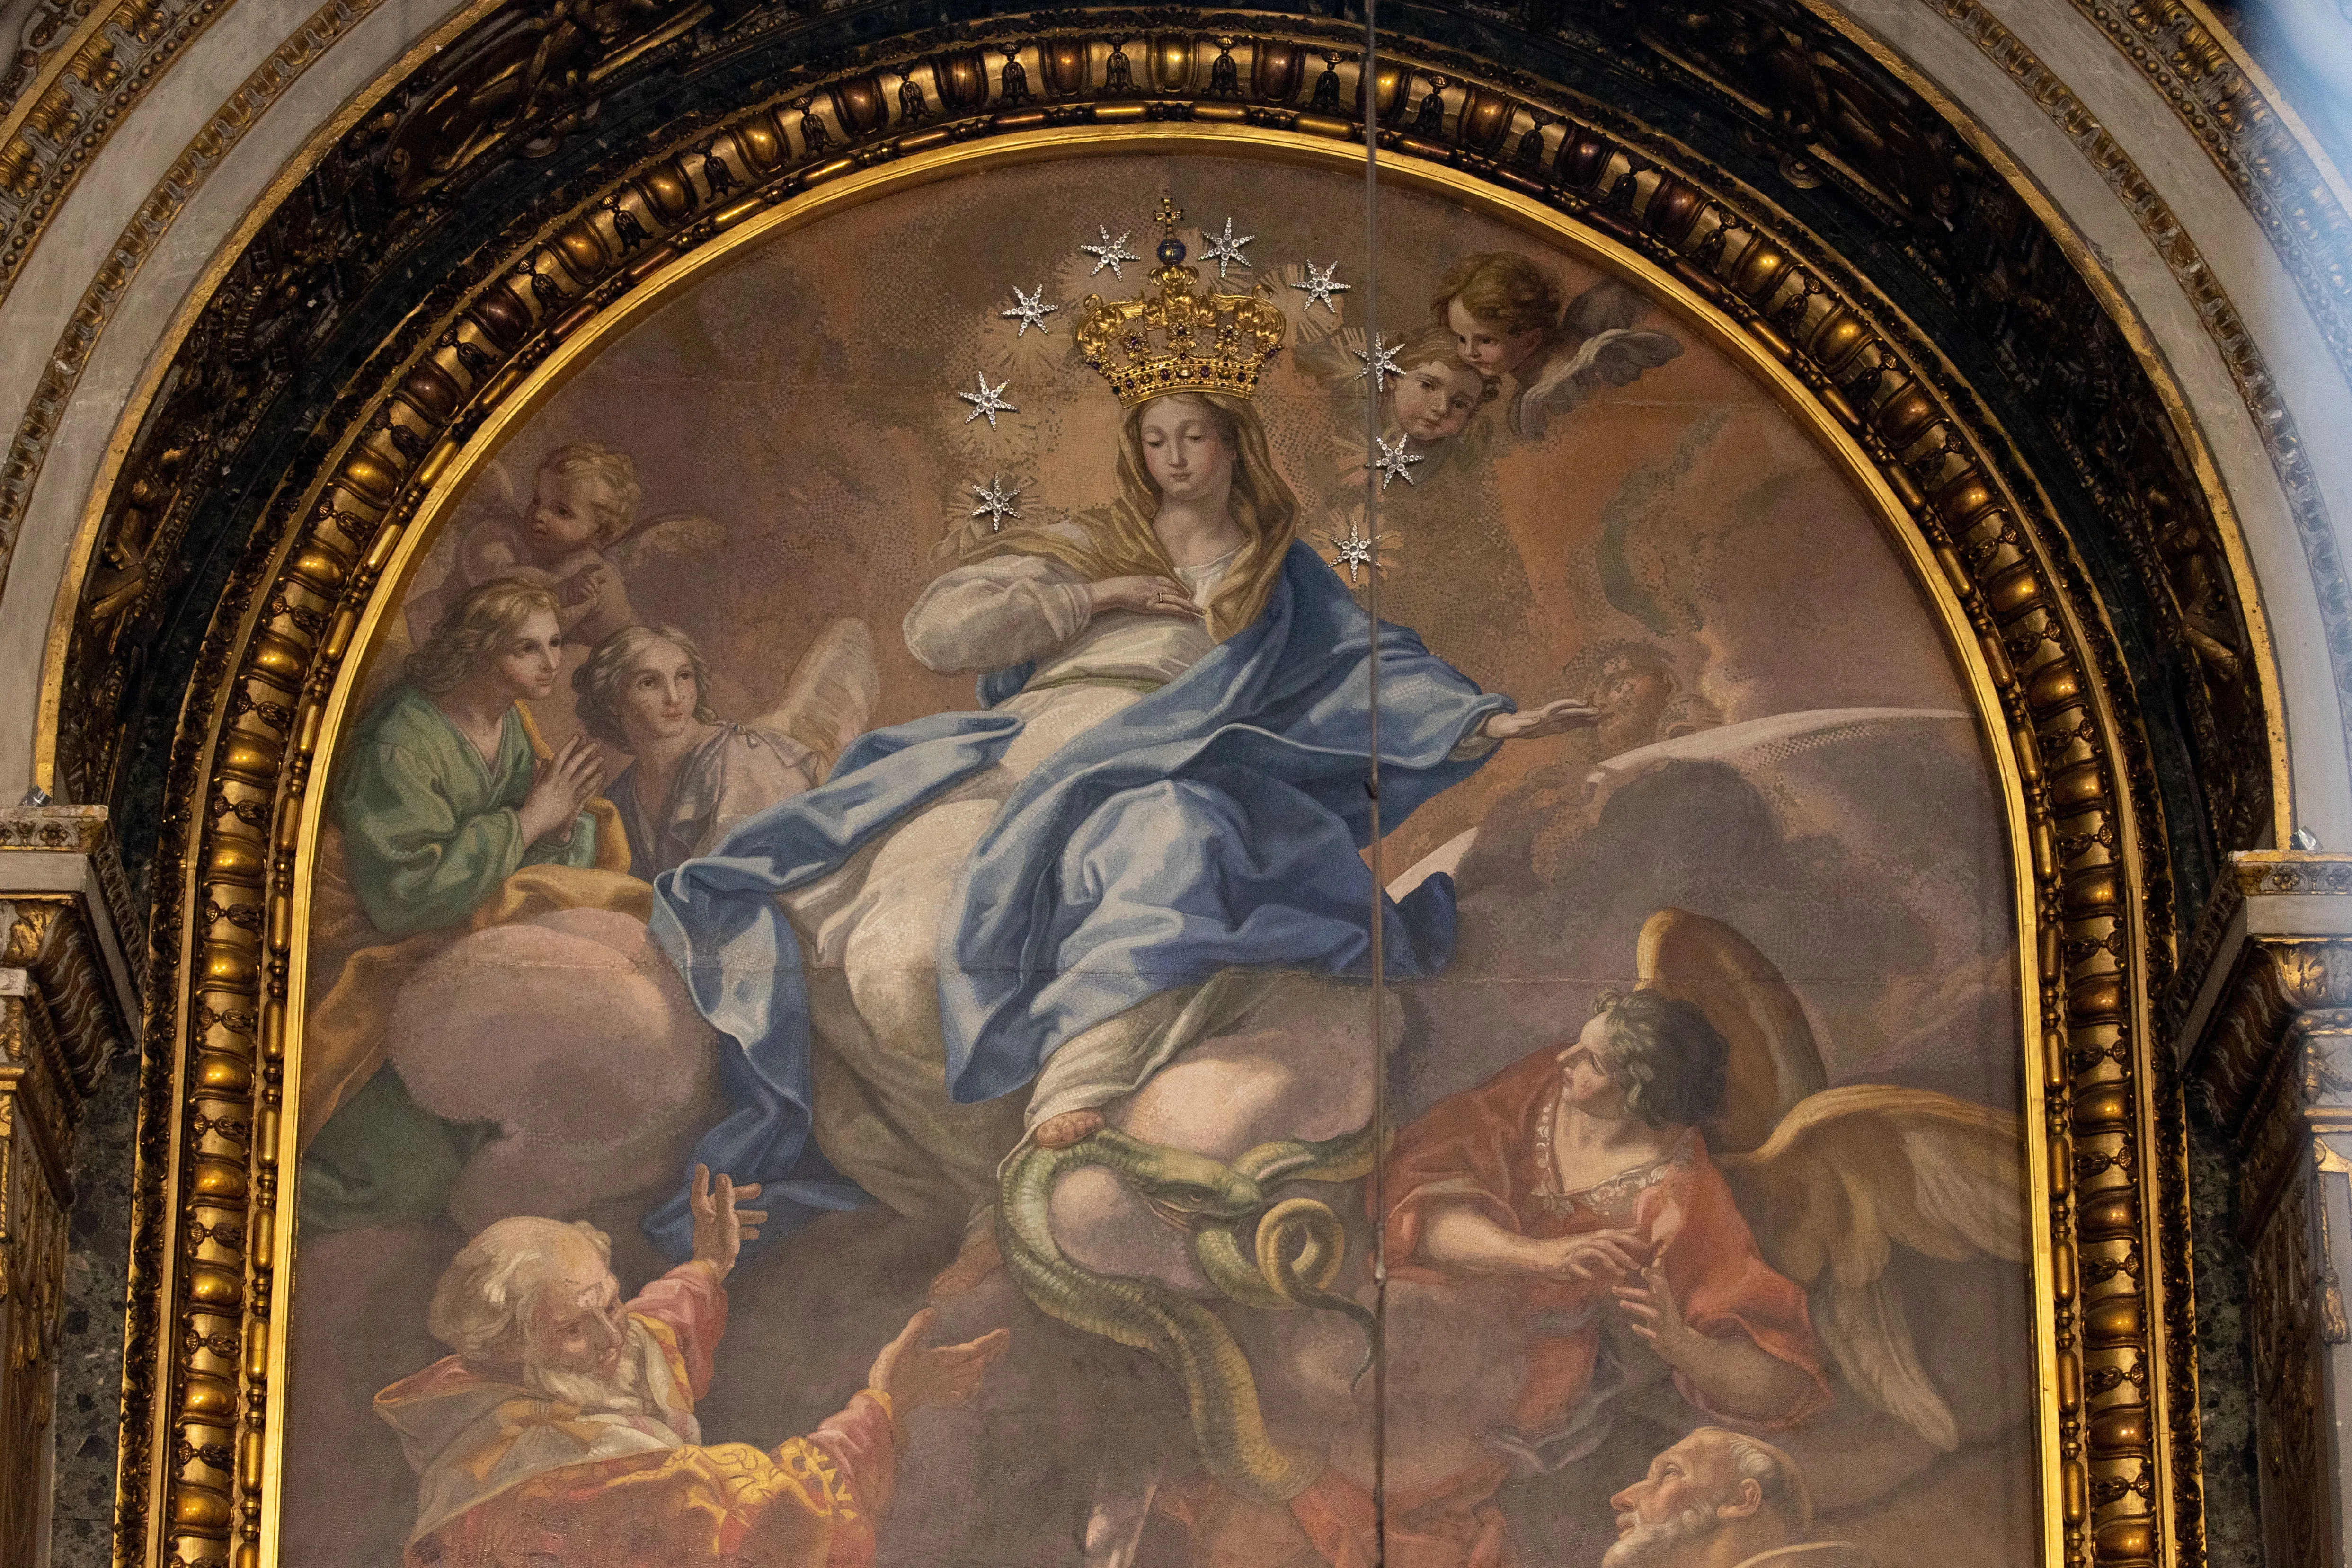 In St. Peter's Basilica's Chapel of the Choir, a large mosaic based on painting by Italian artist Pietro Bianchi depicts Mary, Virgin Immaculate, in the glory of heaven being venerated by St. John Chrysostom (left) and other saints. Daniel Ibañez/CNA